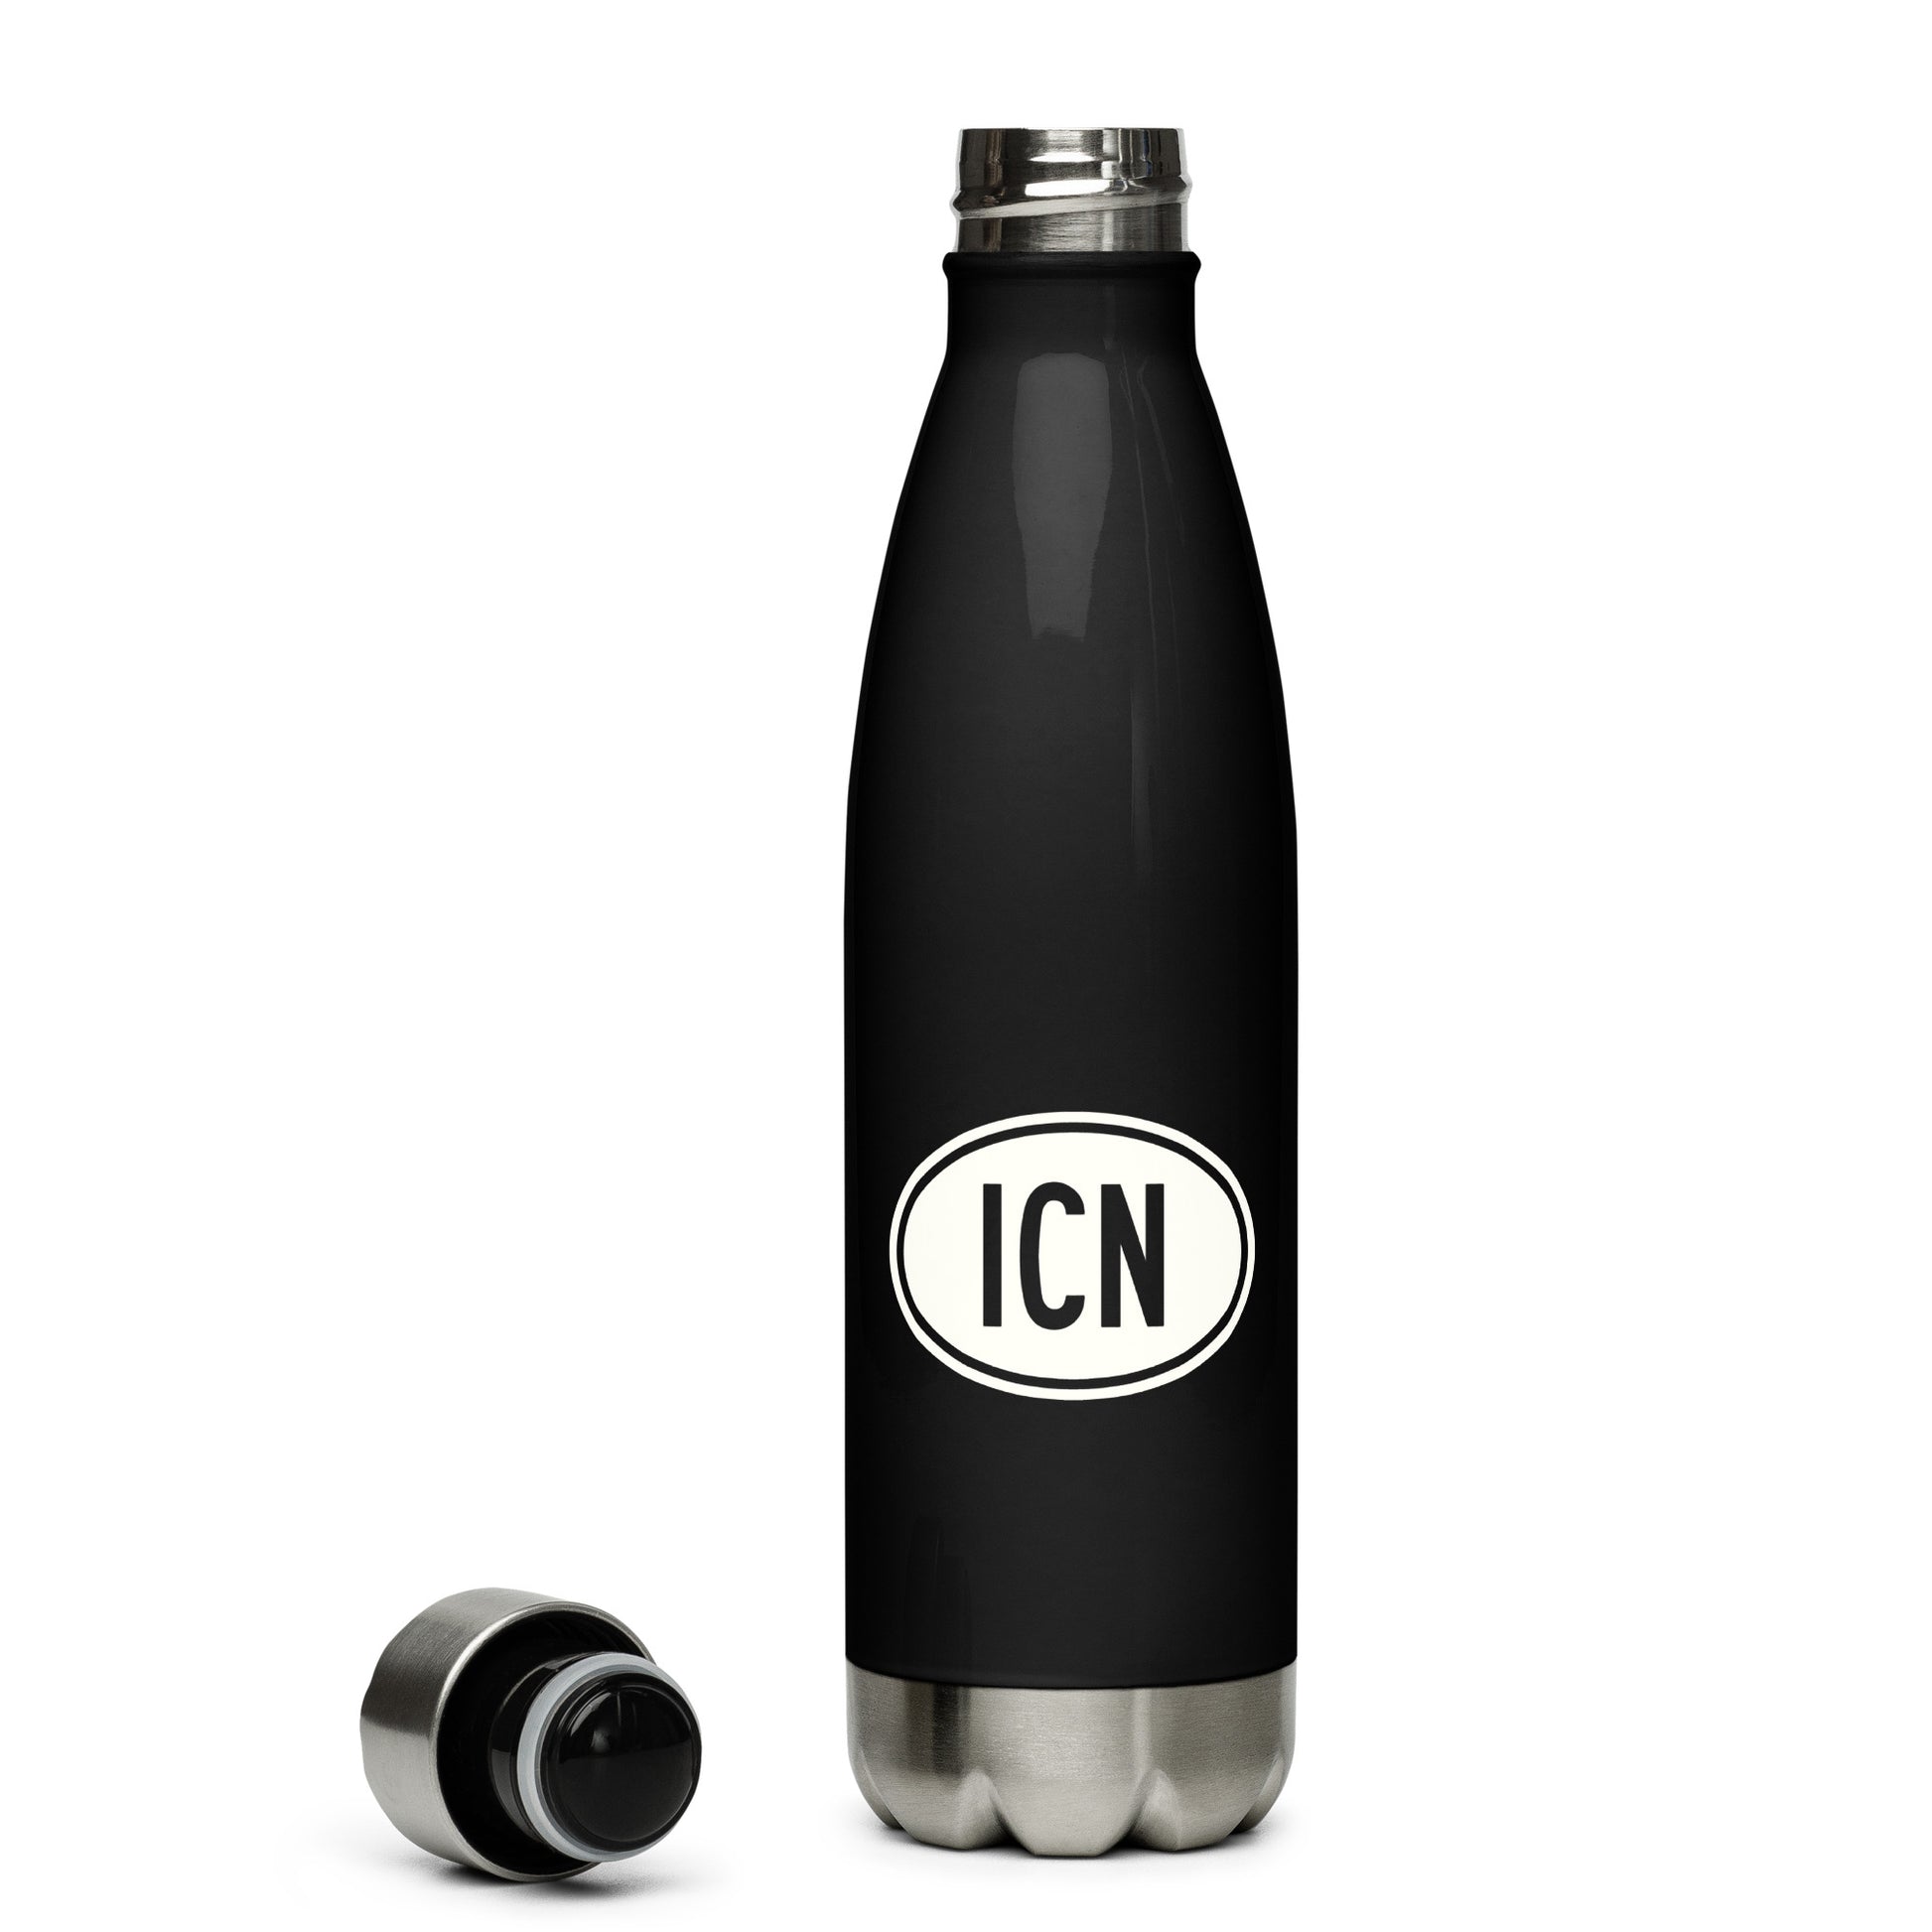 Unique Travel Gift Water Bottle - White Oval • ICN Seoul • YHM Designs - Image 04